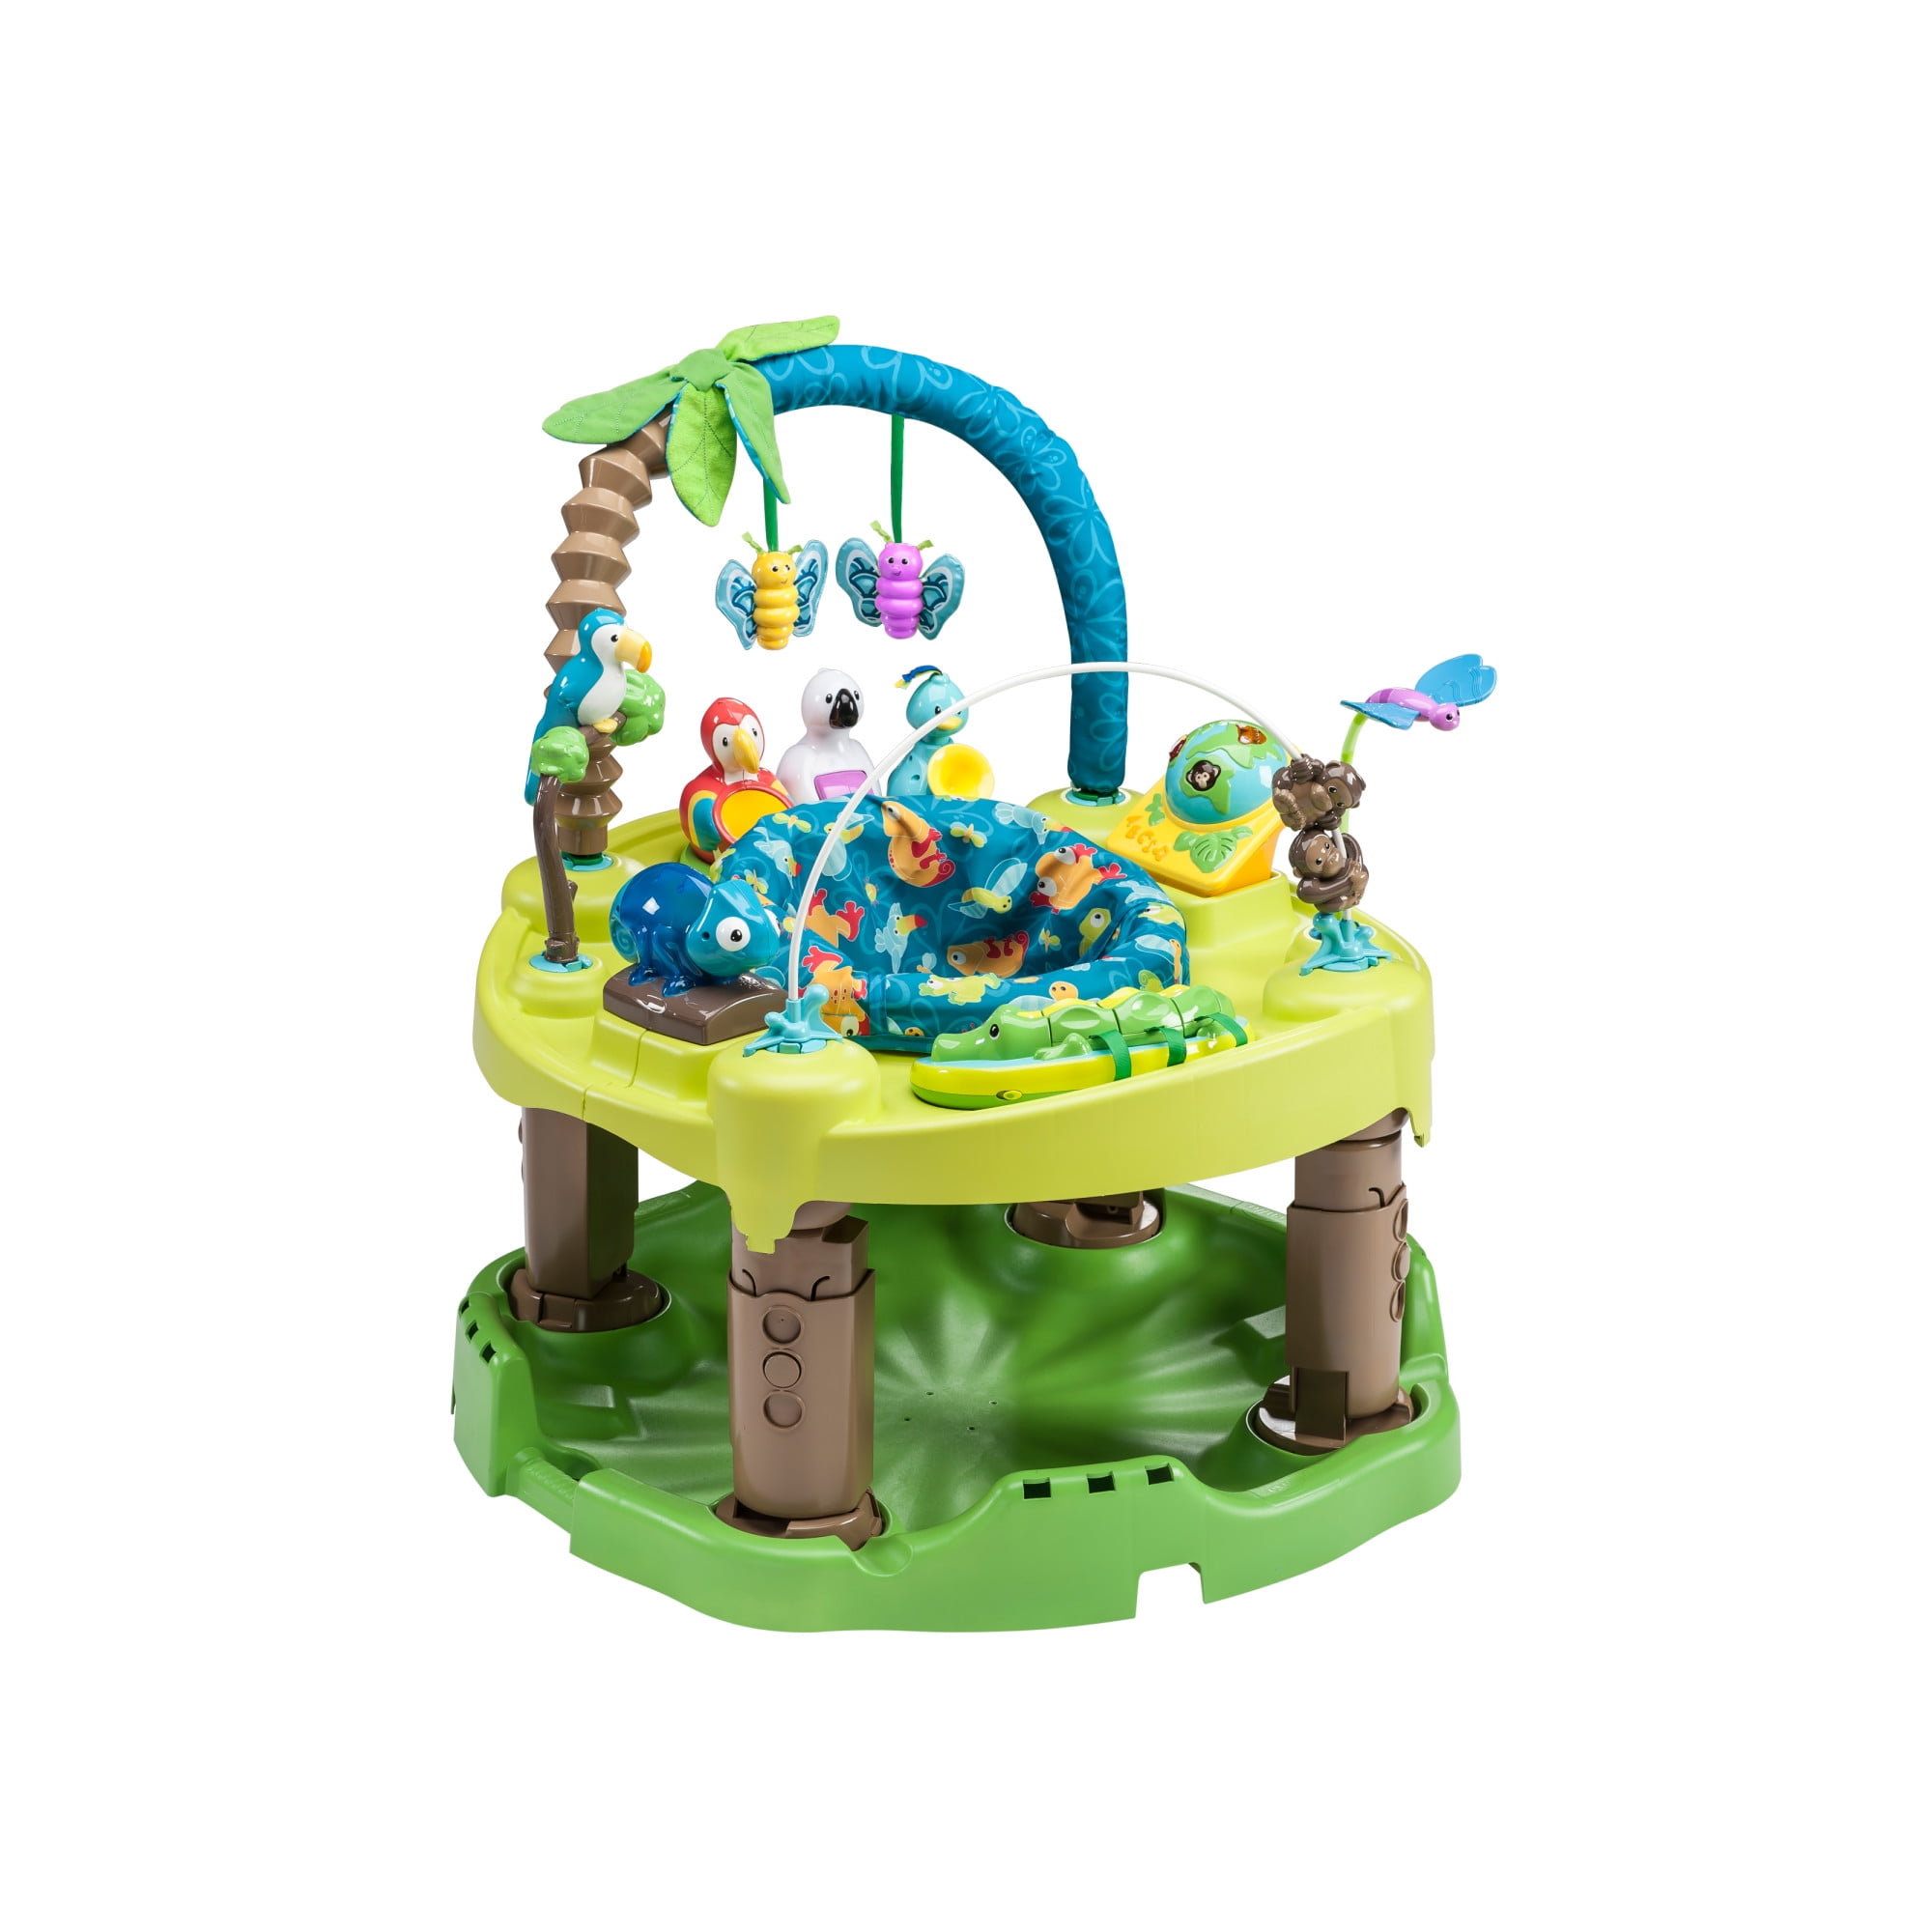 Baby Entertainers Activity Center Jumperoo Exersaucer Step Play Piano Walker Toy 